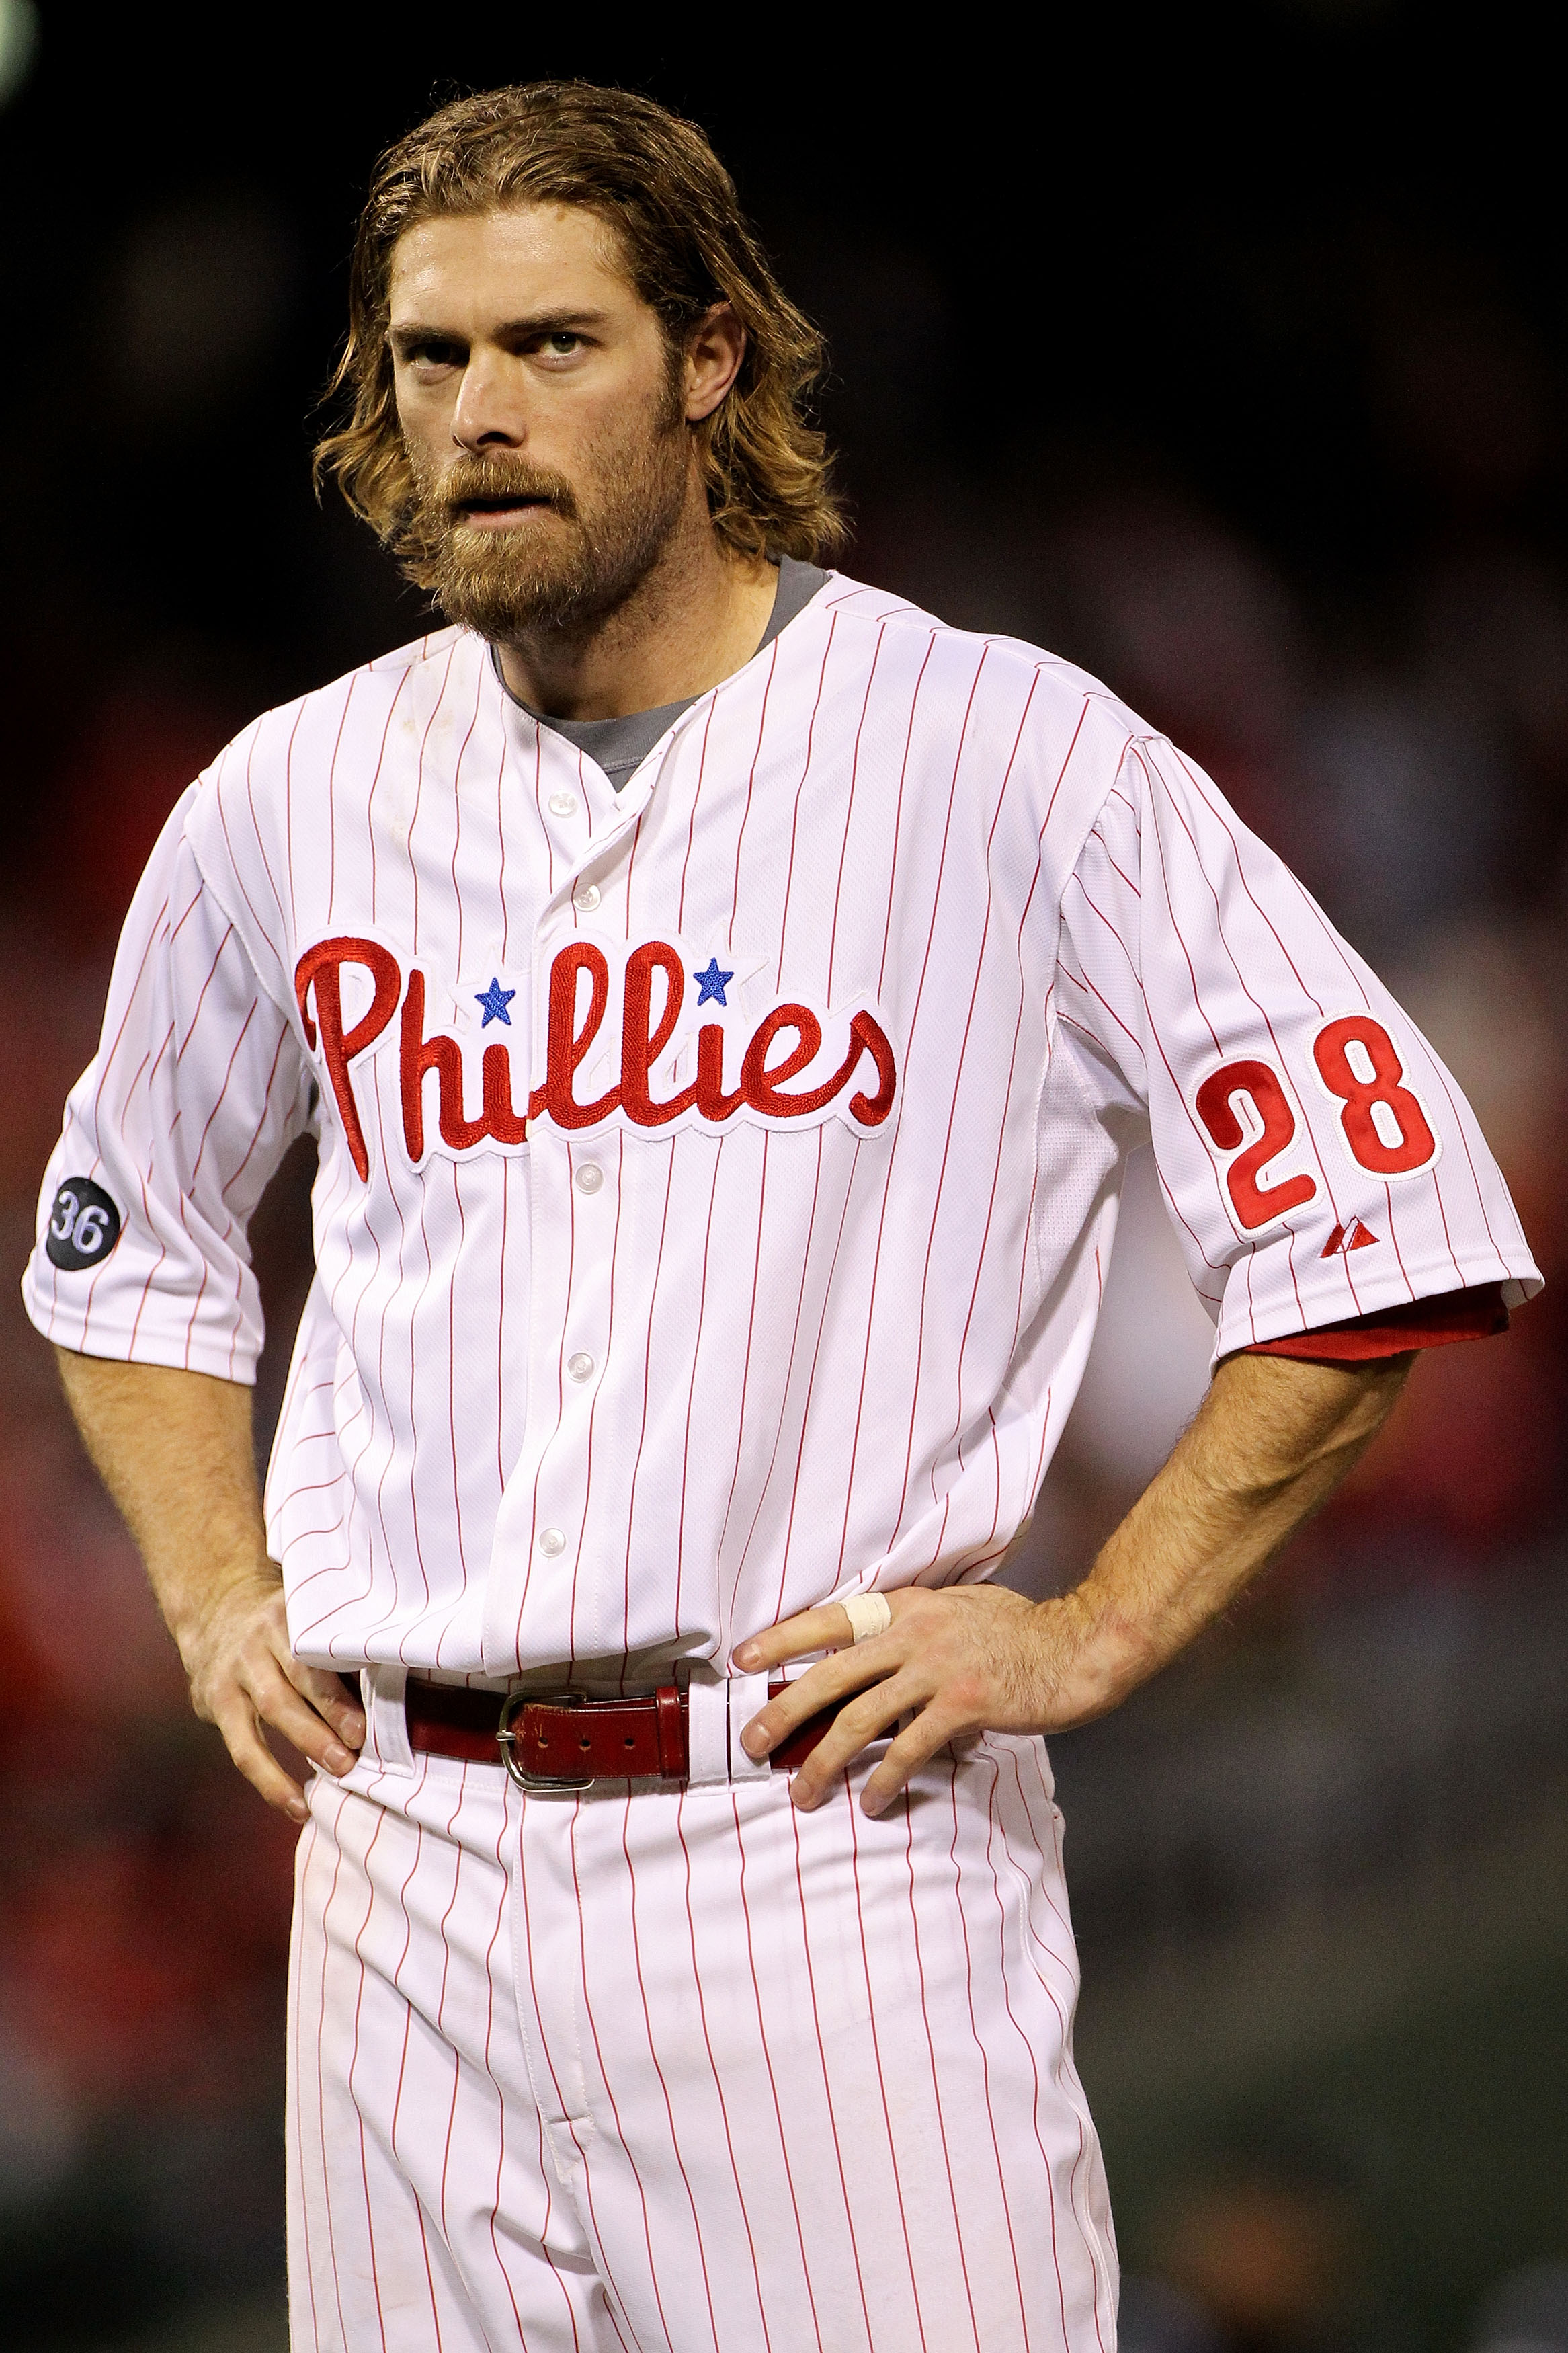 PHILADELPHIA - OCTOBER 23:  Jayson Werth #28 of the Philadelphia Phillies looks on against the San Francisco Giants in Game Six of the NLCS during the 2010 MLB Playoffs at Citizens Bank Park on October 23, 2010 in Philadelphia, Pennsylvania.  (Photo by Do